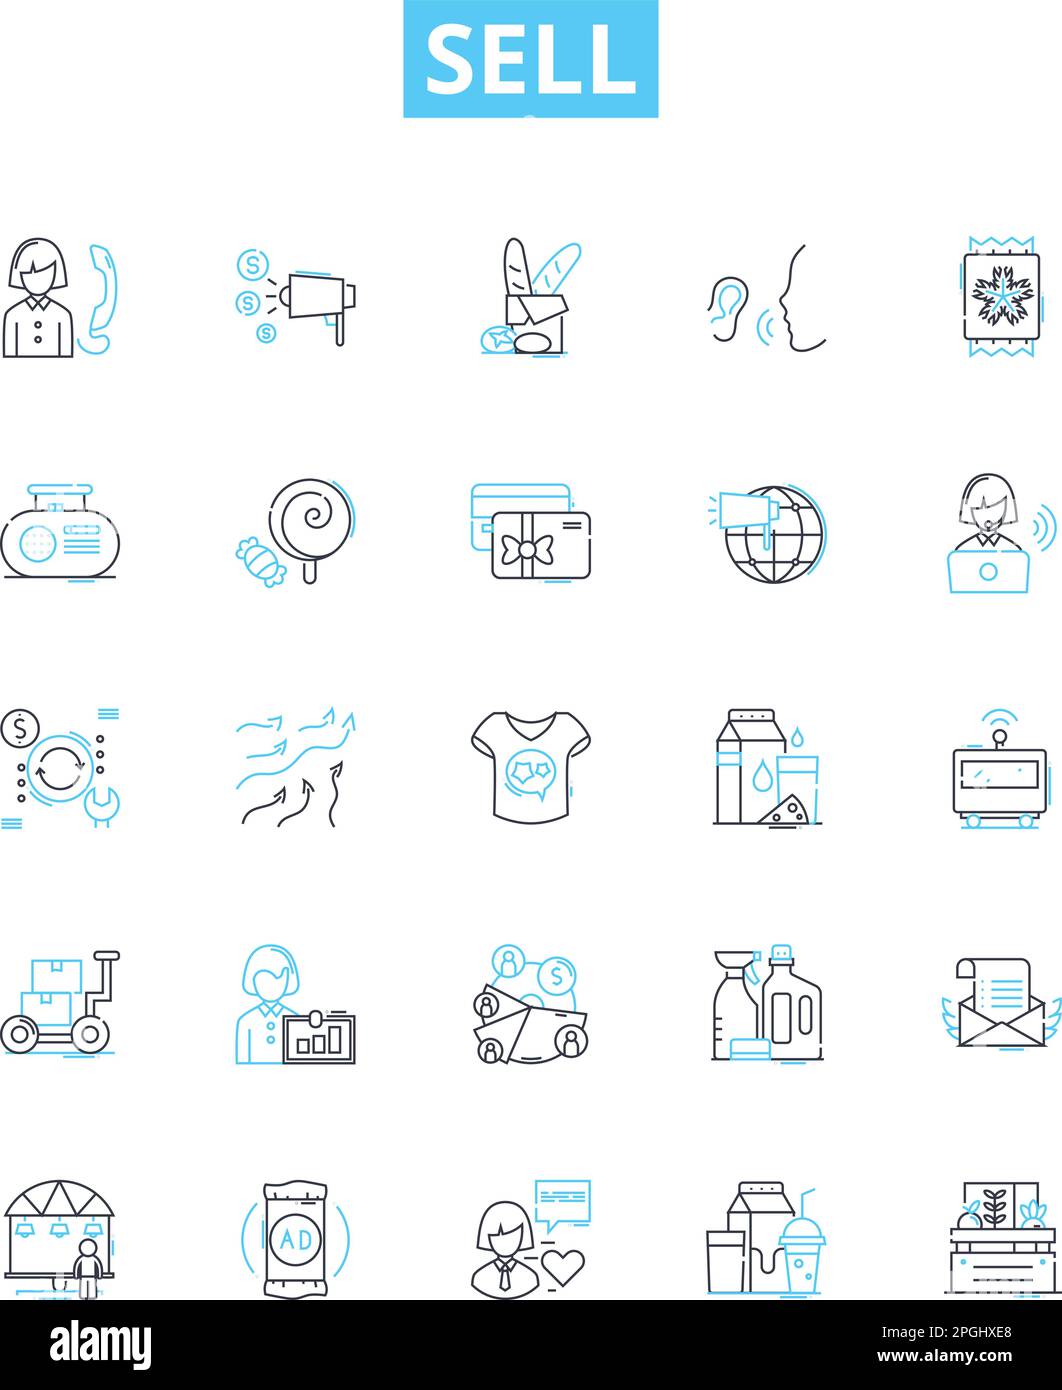 Sell vector line icons set. Sell, Market, Trade, Transact, Promote, Exchange, Retail illustration outline concept symbols and signs Stock Vector